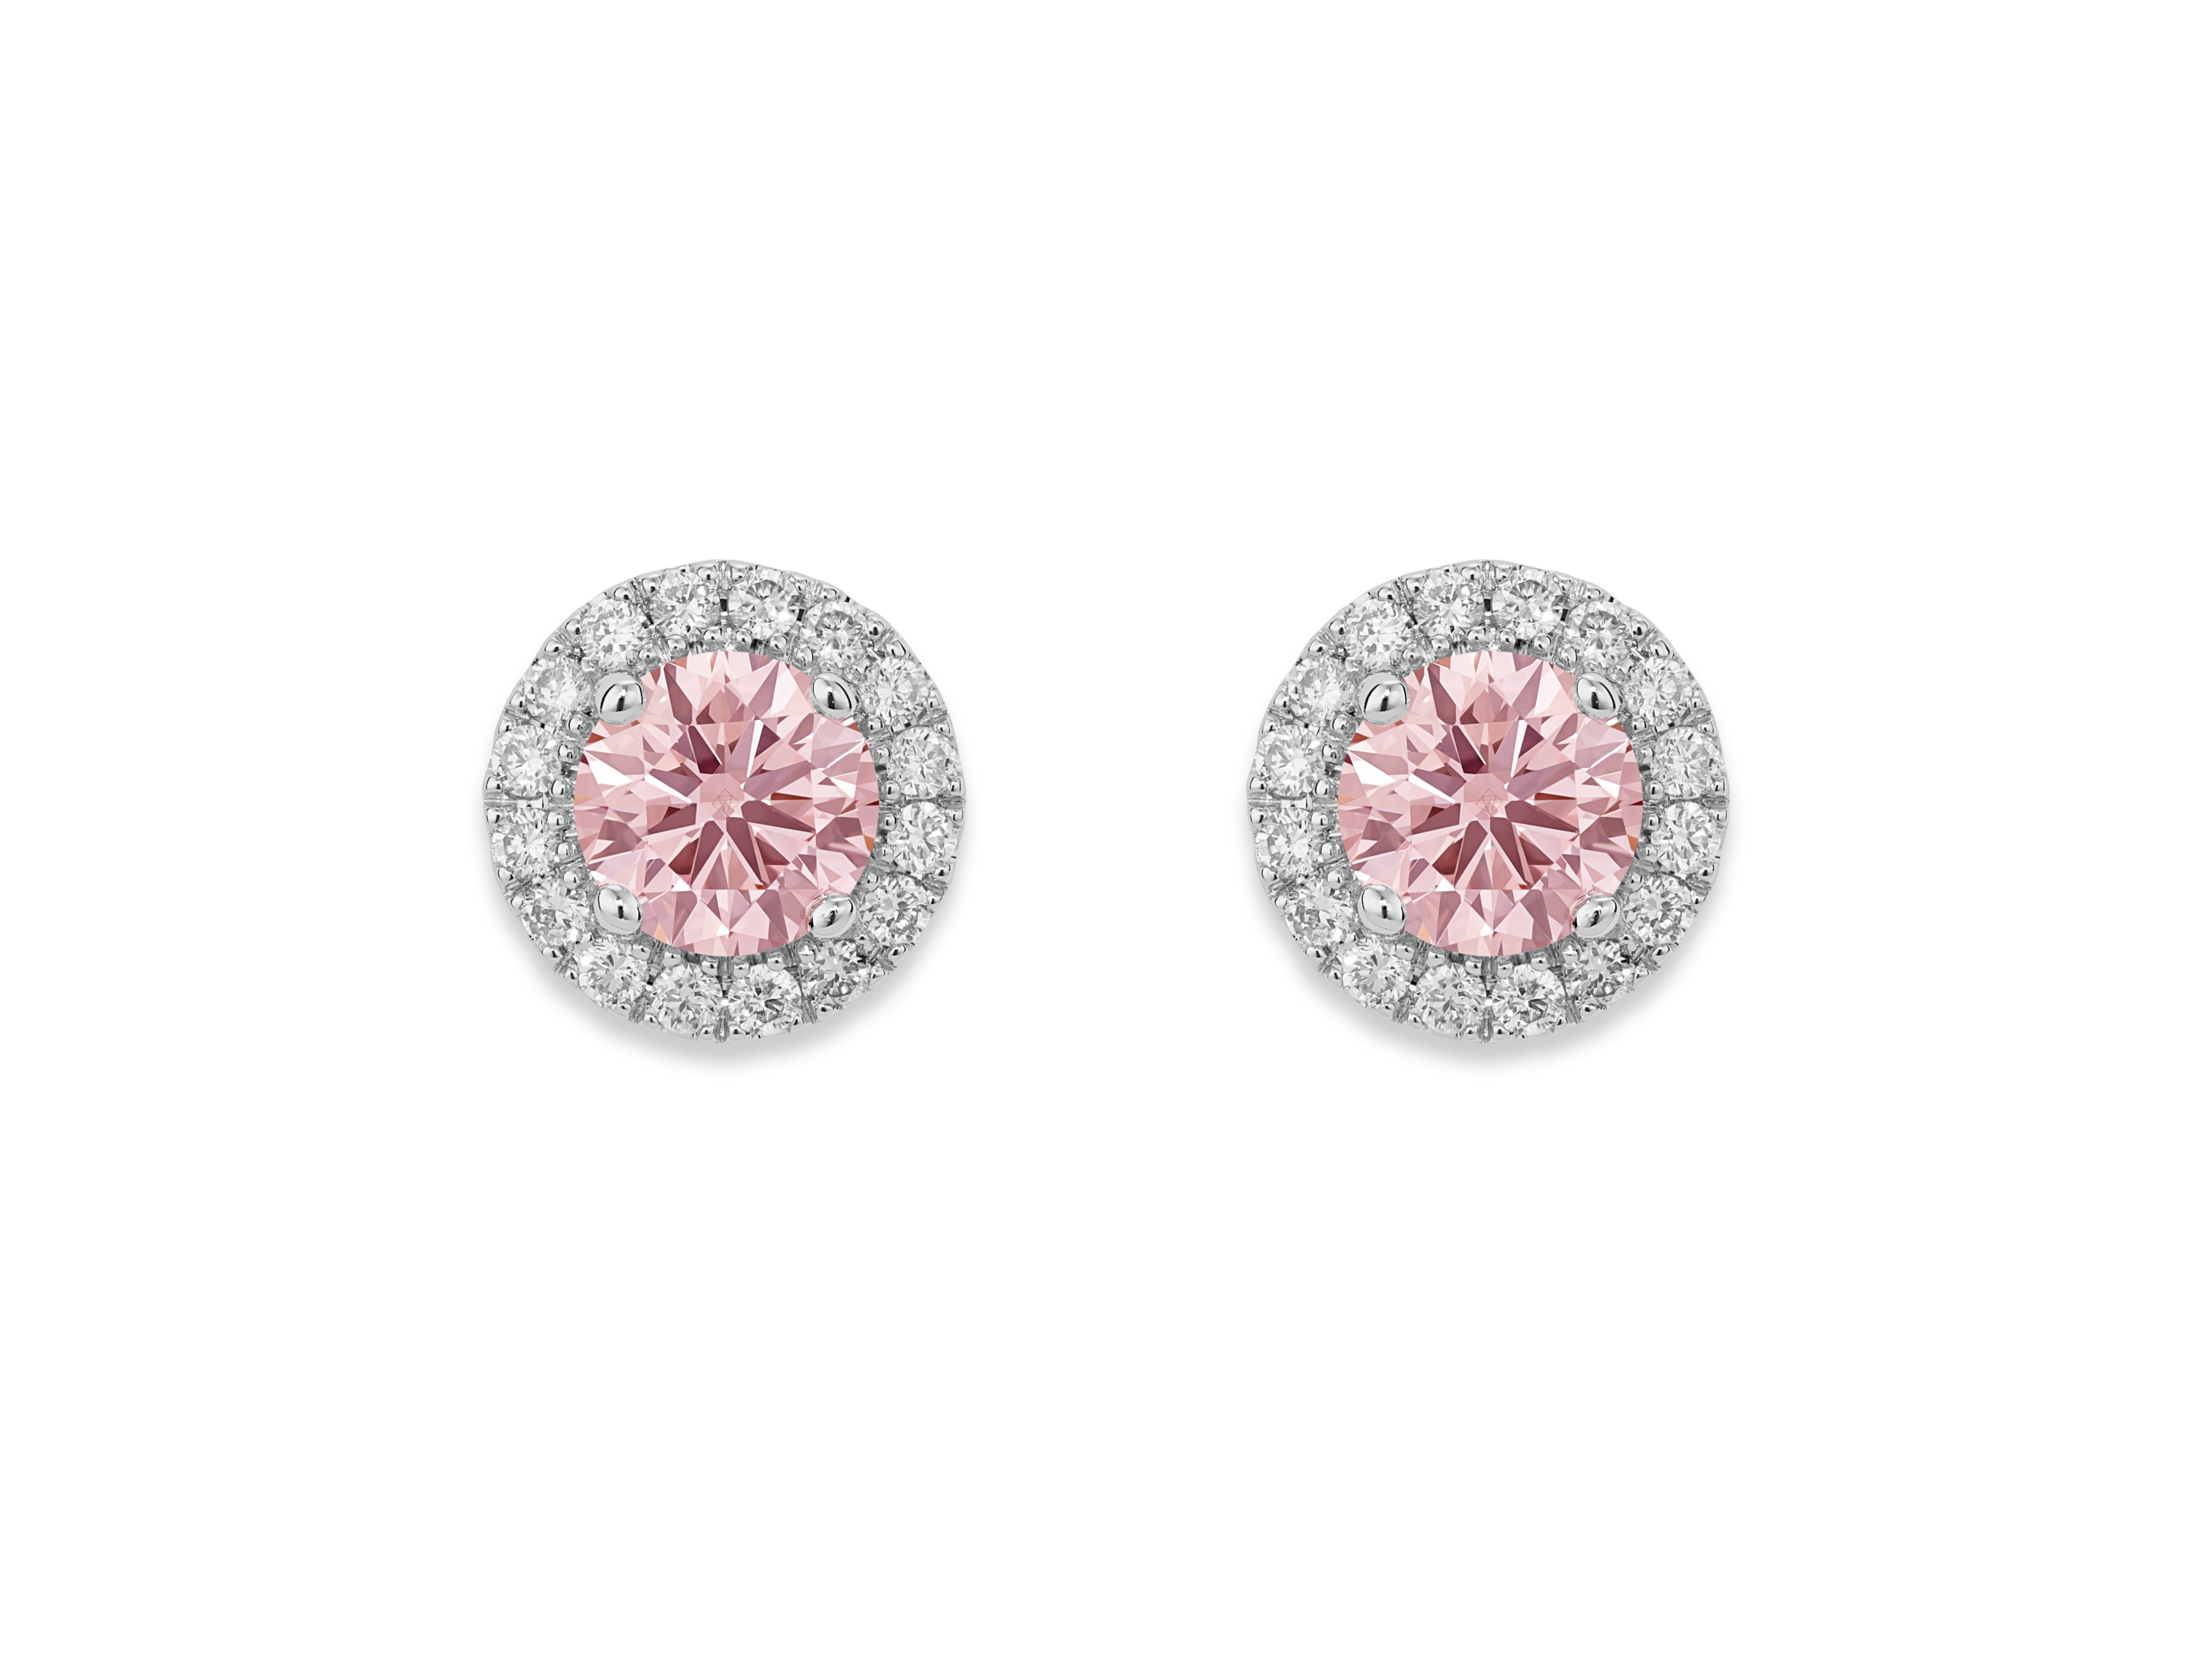 Front view of pink 1 carat total weight halo earrings in 14k white gold